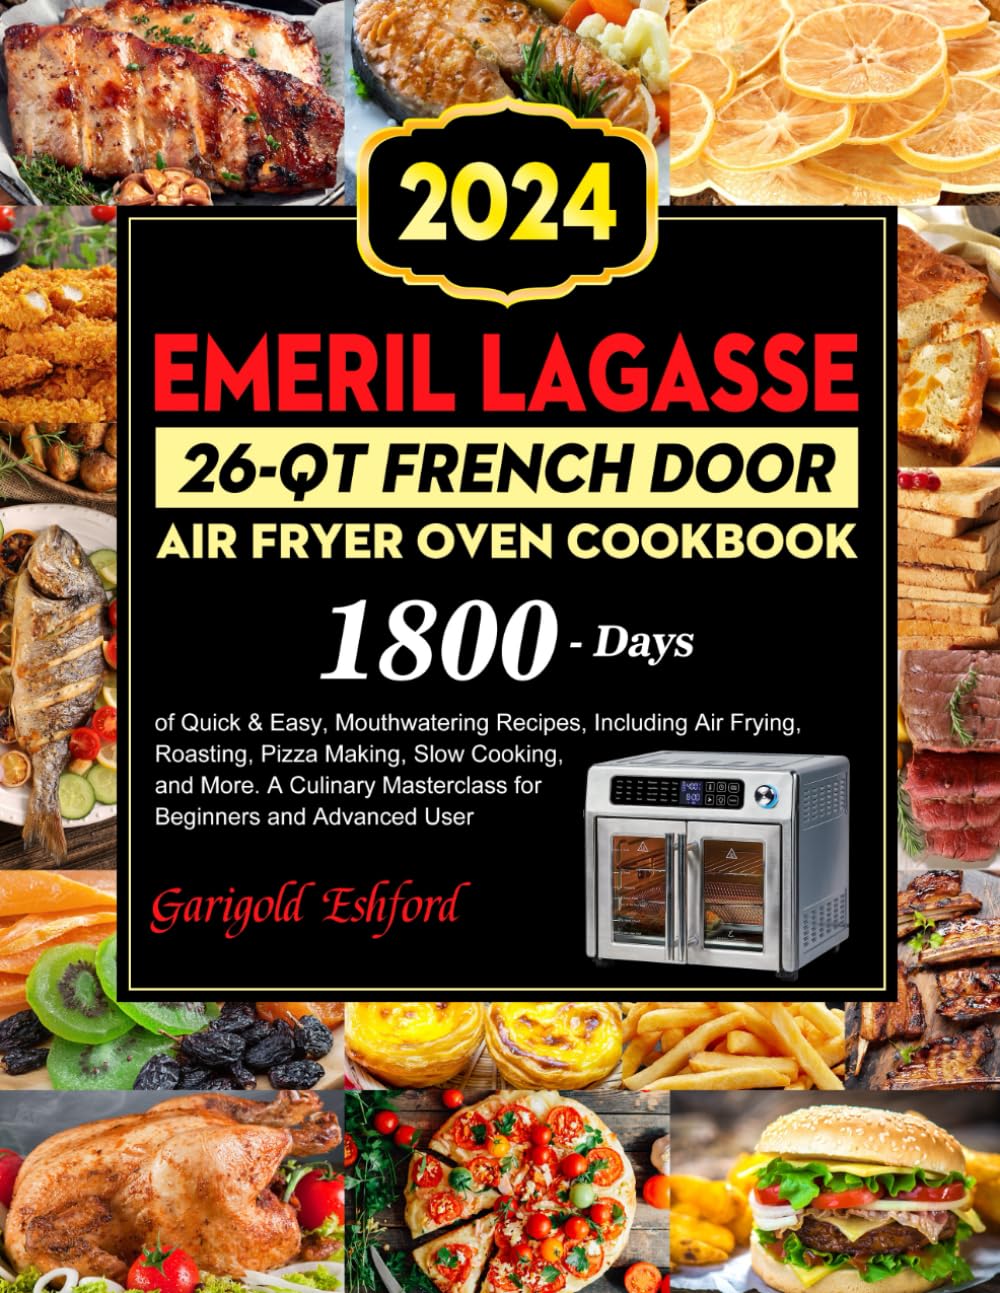 Emeril Lagasse 26-QT French Door Air Fryer Oven Cookbook: 1800 Days of Quick & Easy, Mouthwatering Recipes, Including Air Frying, Roasting, Pizza Making, Slow Cooking, and More.